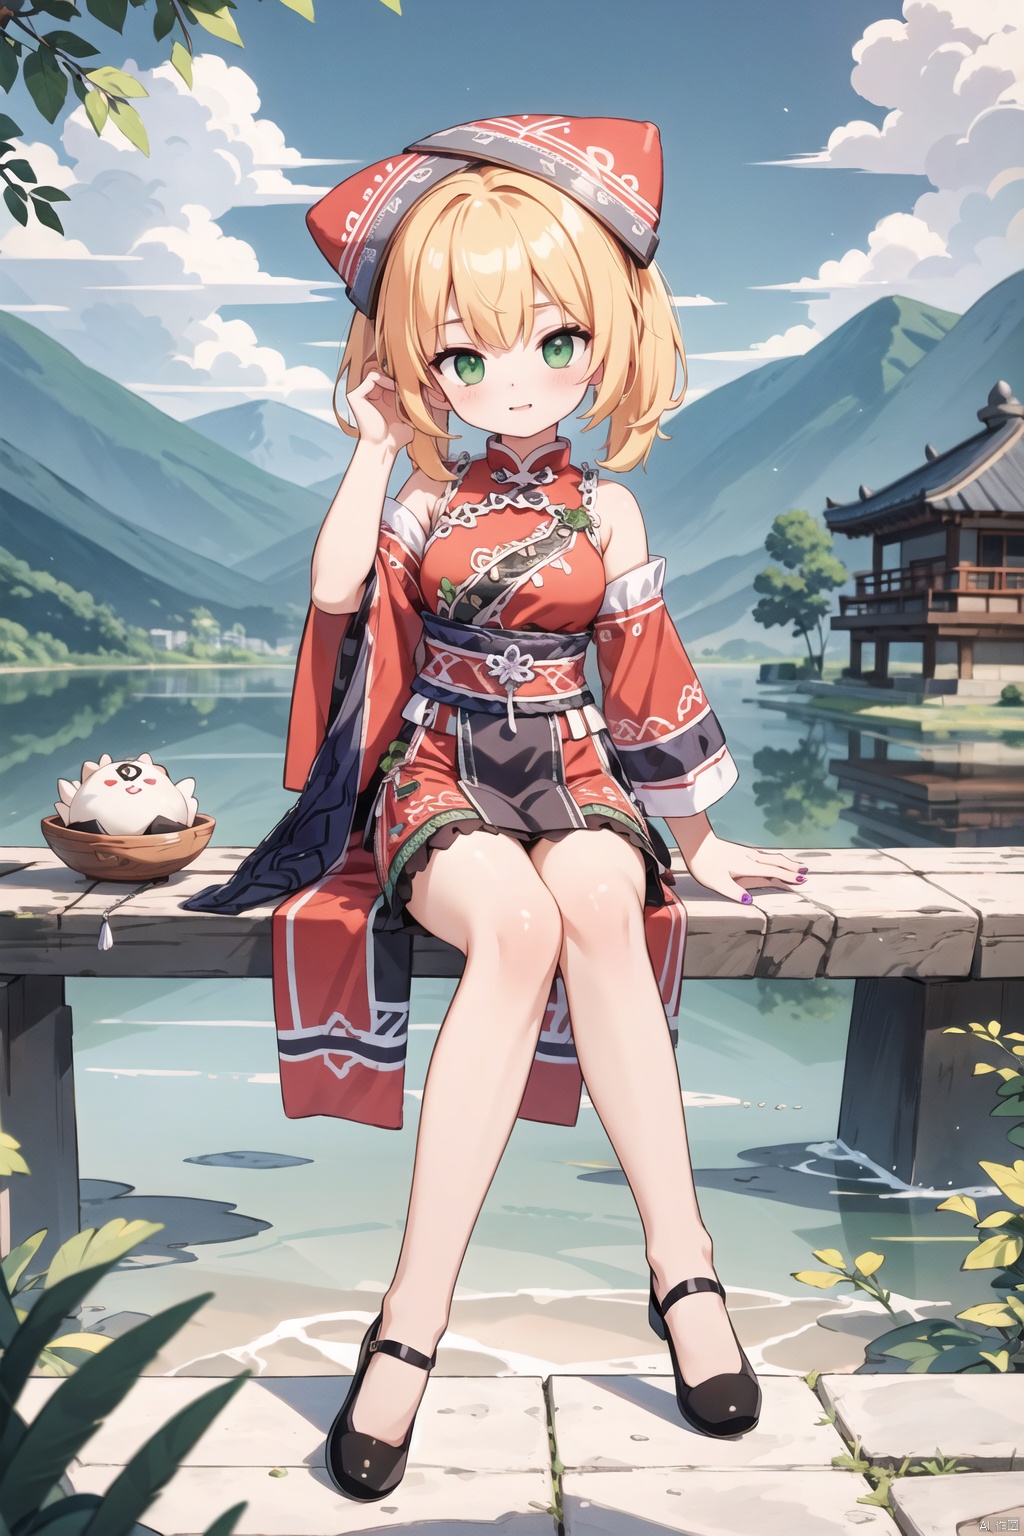  (best quality,4k,8k,highres,masterpiece:1.2),ultra-detailed,HDR,cinematic lighting,zhuang,A girl with long brown hair and crossed bangs, wearing vibrant Chinese clothes, sits by a river under a sky filled with falling leaves. She has striking green eyes and green nails, with streaks of green in her hair. The girl's hair partially covers her eyes, adding to her mysterious aura. She is adorned with a bead necklace, an arm tattoo, and various jewelry pieces, including rings. Multicolored footwear complements her outfit, along with a necklace featuring an orange tassel. The girl is sitting with her legs crossed, enjoying a baozi (Chinese steamed bun) and a dumpling, with a leaf delicately placed on her head. The scene is peaceful, with clouds in the sky adding to the serene atmosphere.